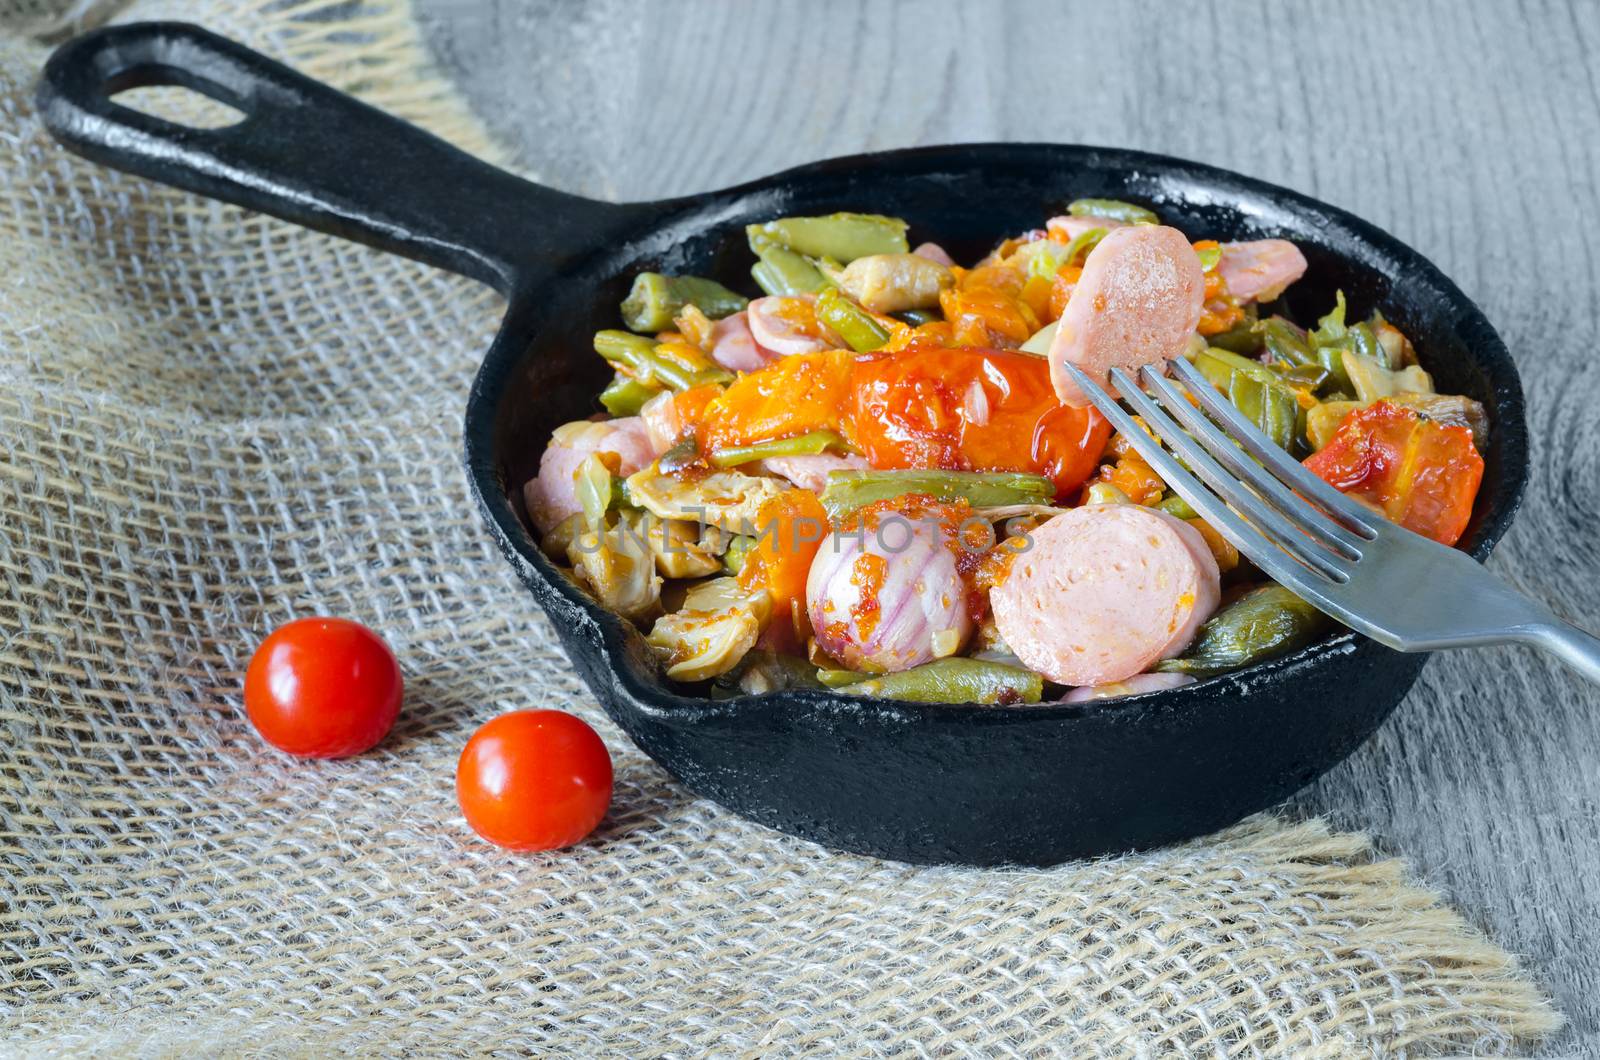 Fried vegetables with chopped sausage in a cast iron skillet. by Gaina